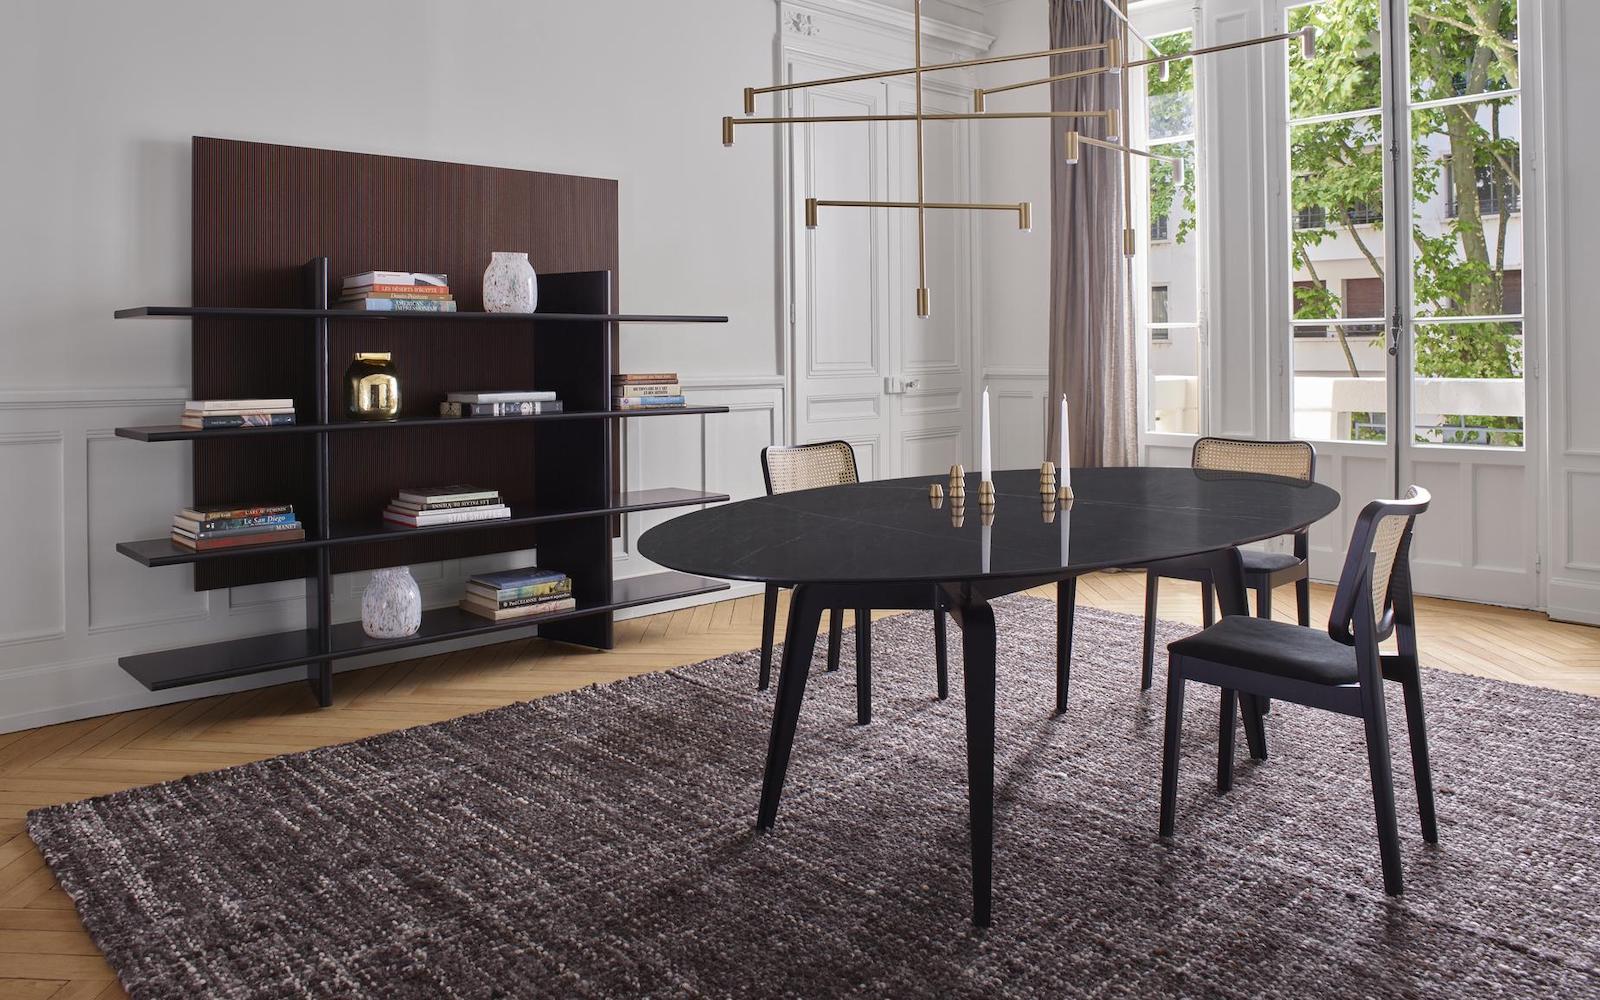 The Ligne Roset Tambour chair in dining room setting